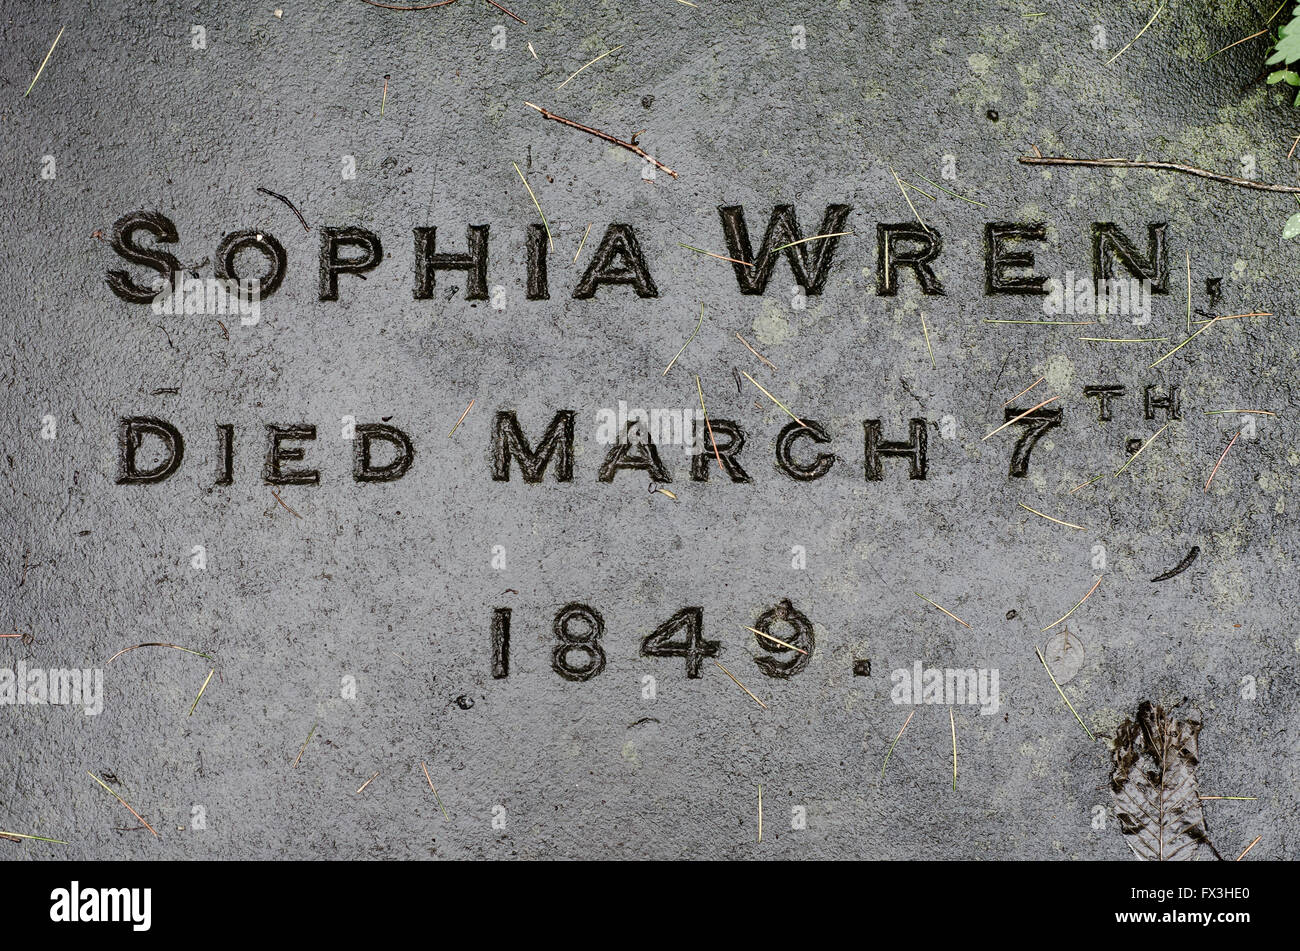 Sophia Wren's gravestone. Name and date of death of the great granddaughter of Sir Christopher Wren, in churchyard in Bath, UK Stock Photo